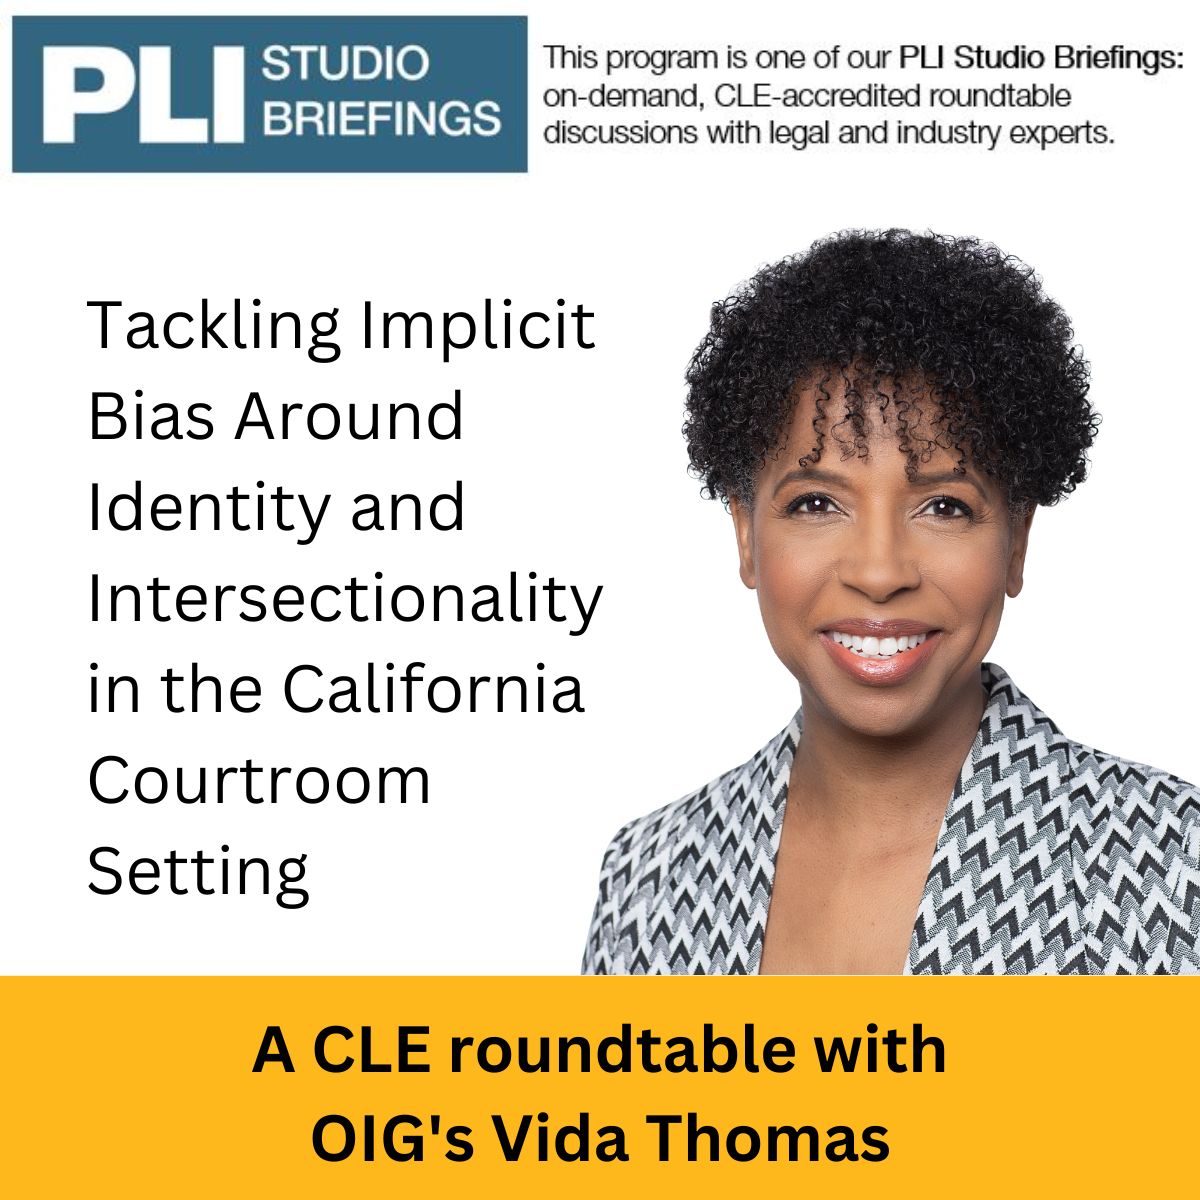 PLI program "Tackling Implicit Bias Around Identity and Intersectionality in the California Courtroom Setting"